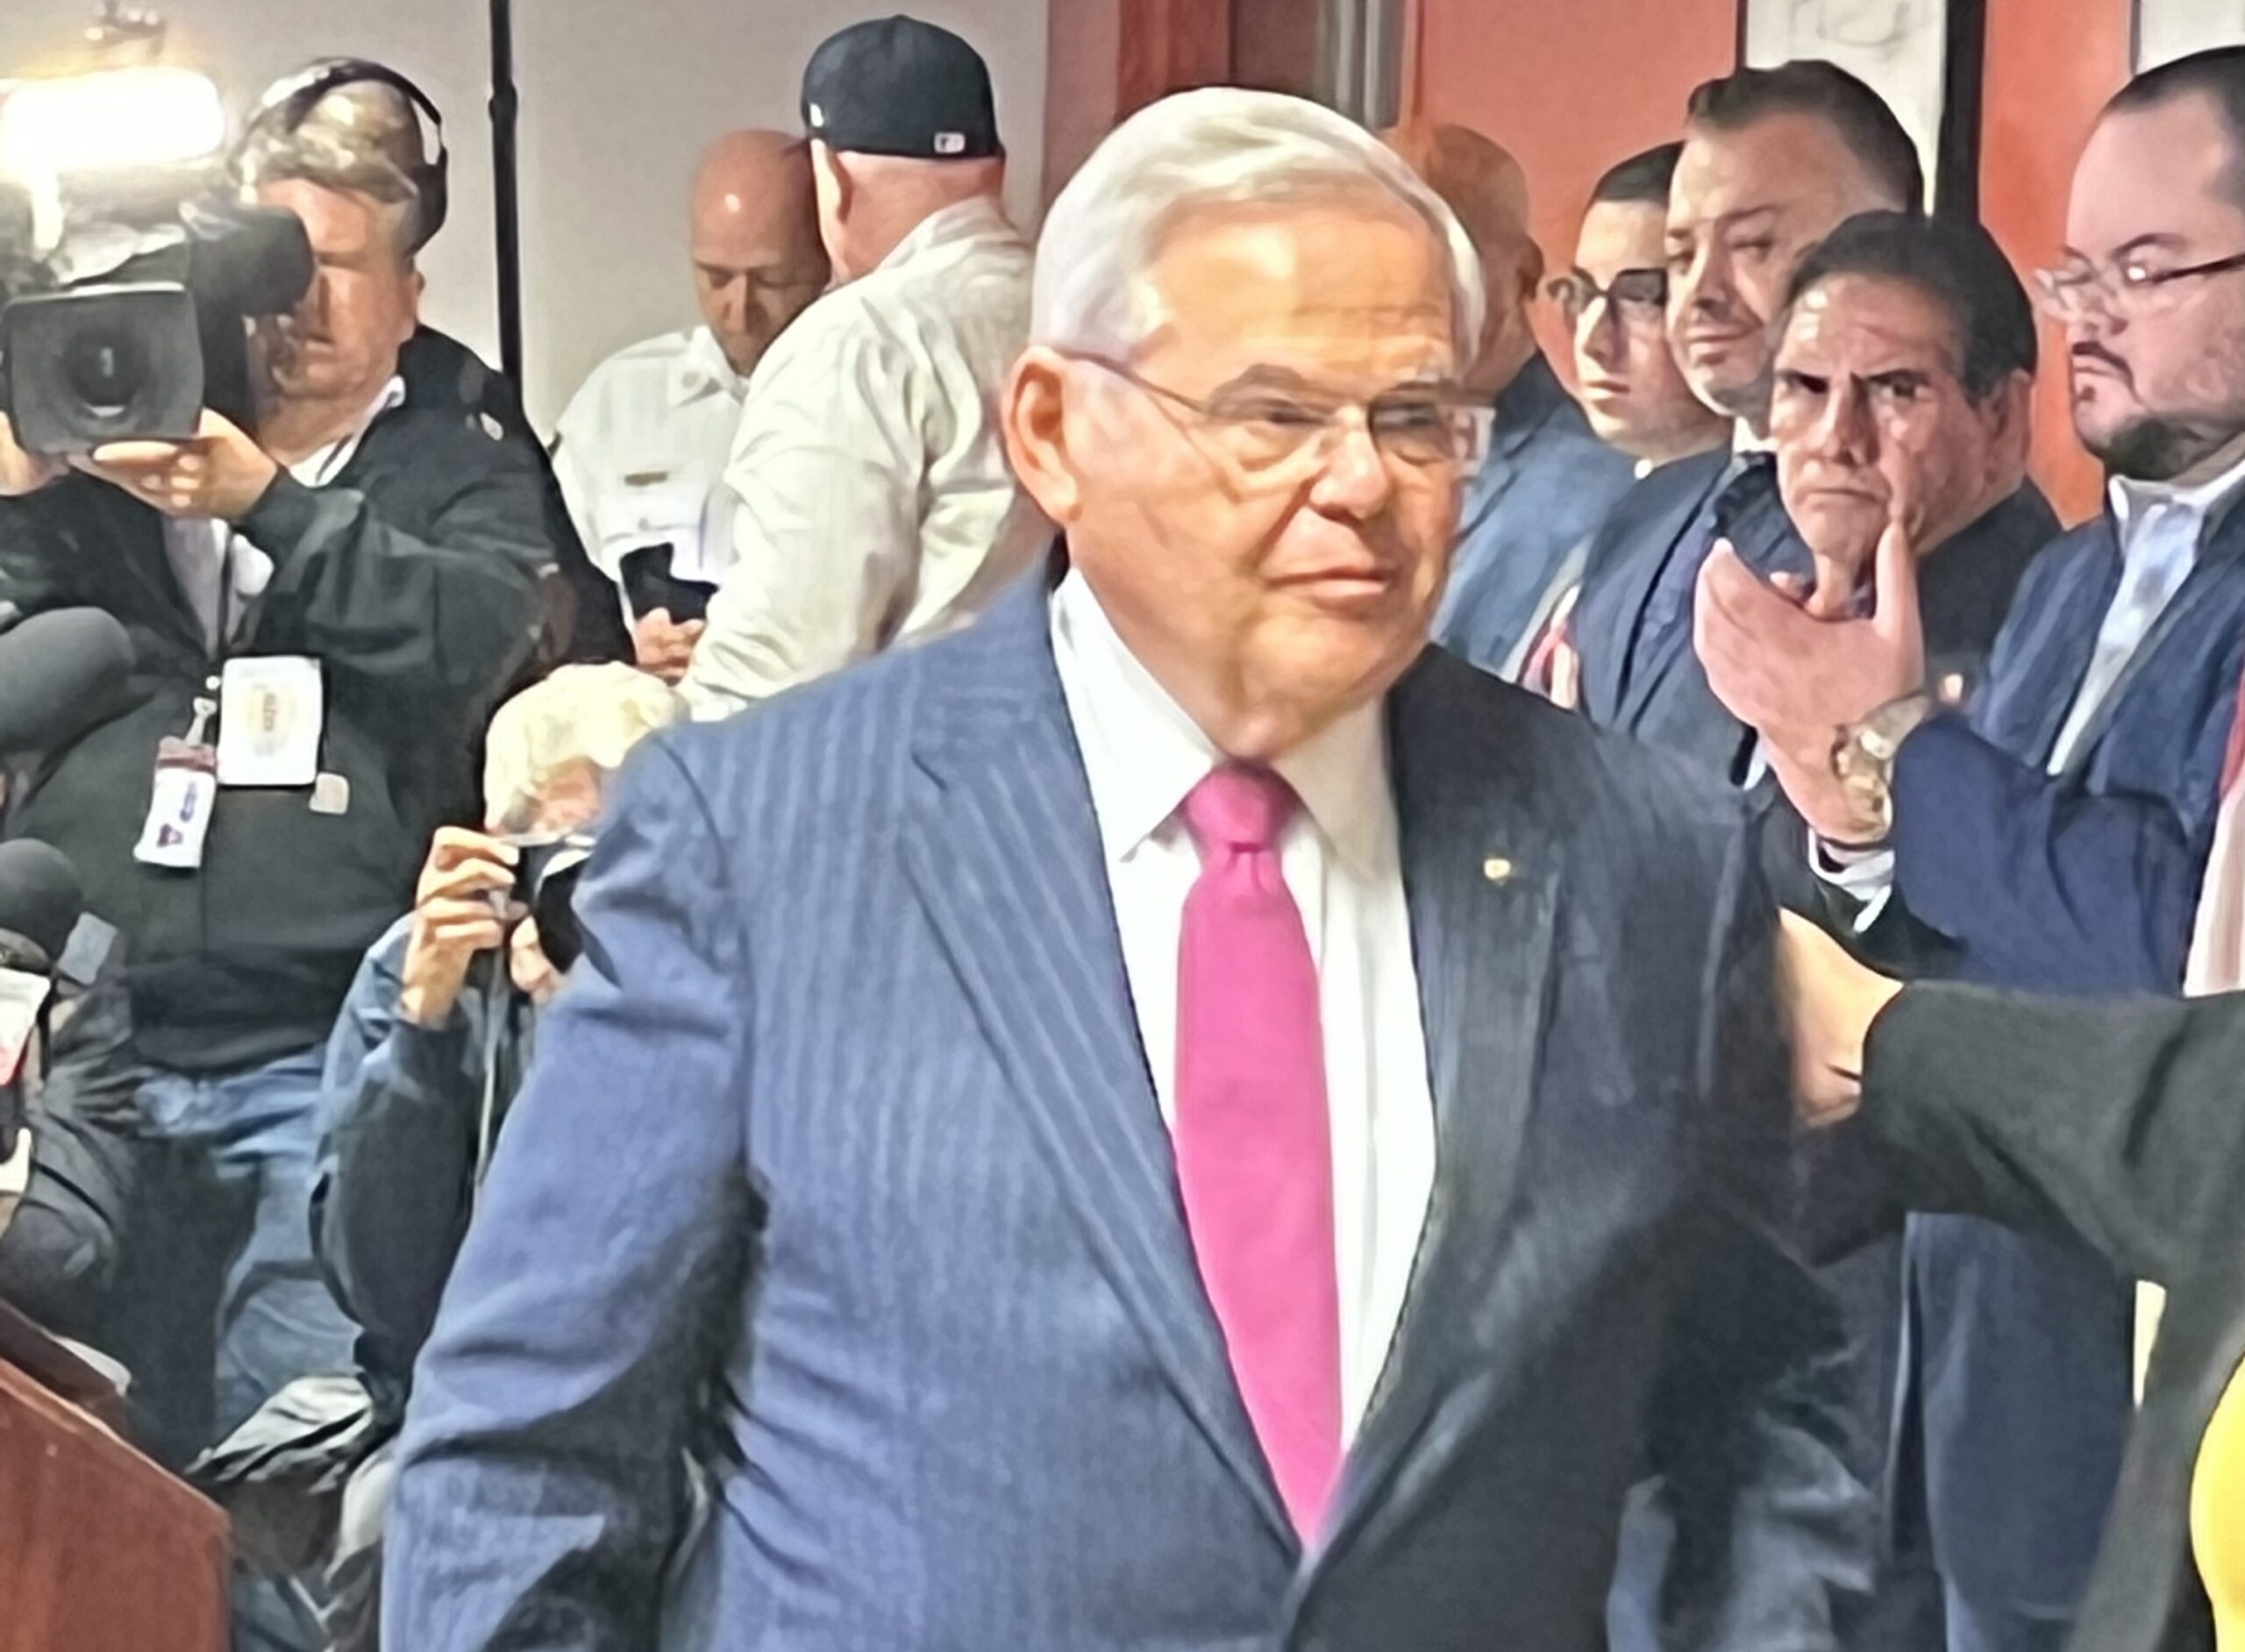 Insider NJ reports that New Jersey residents are calling for Senator Menendez to resign